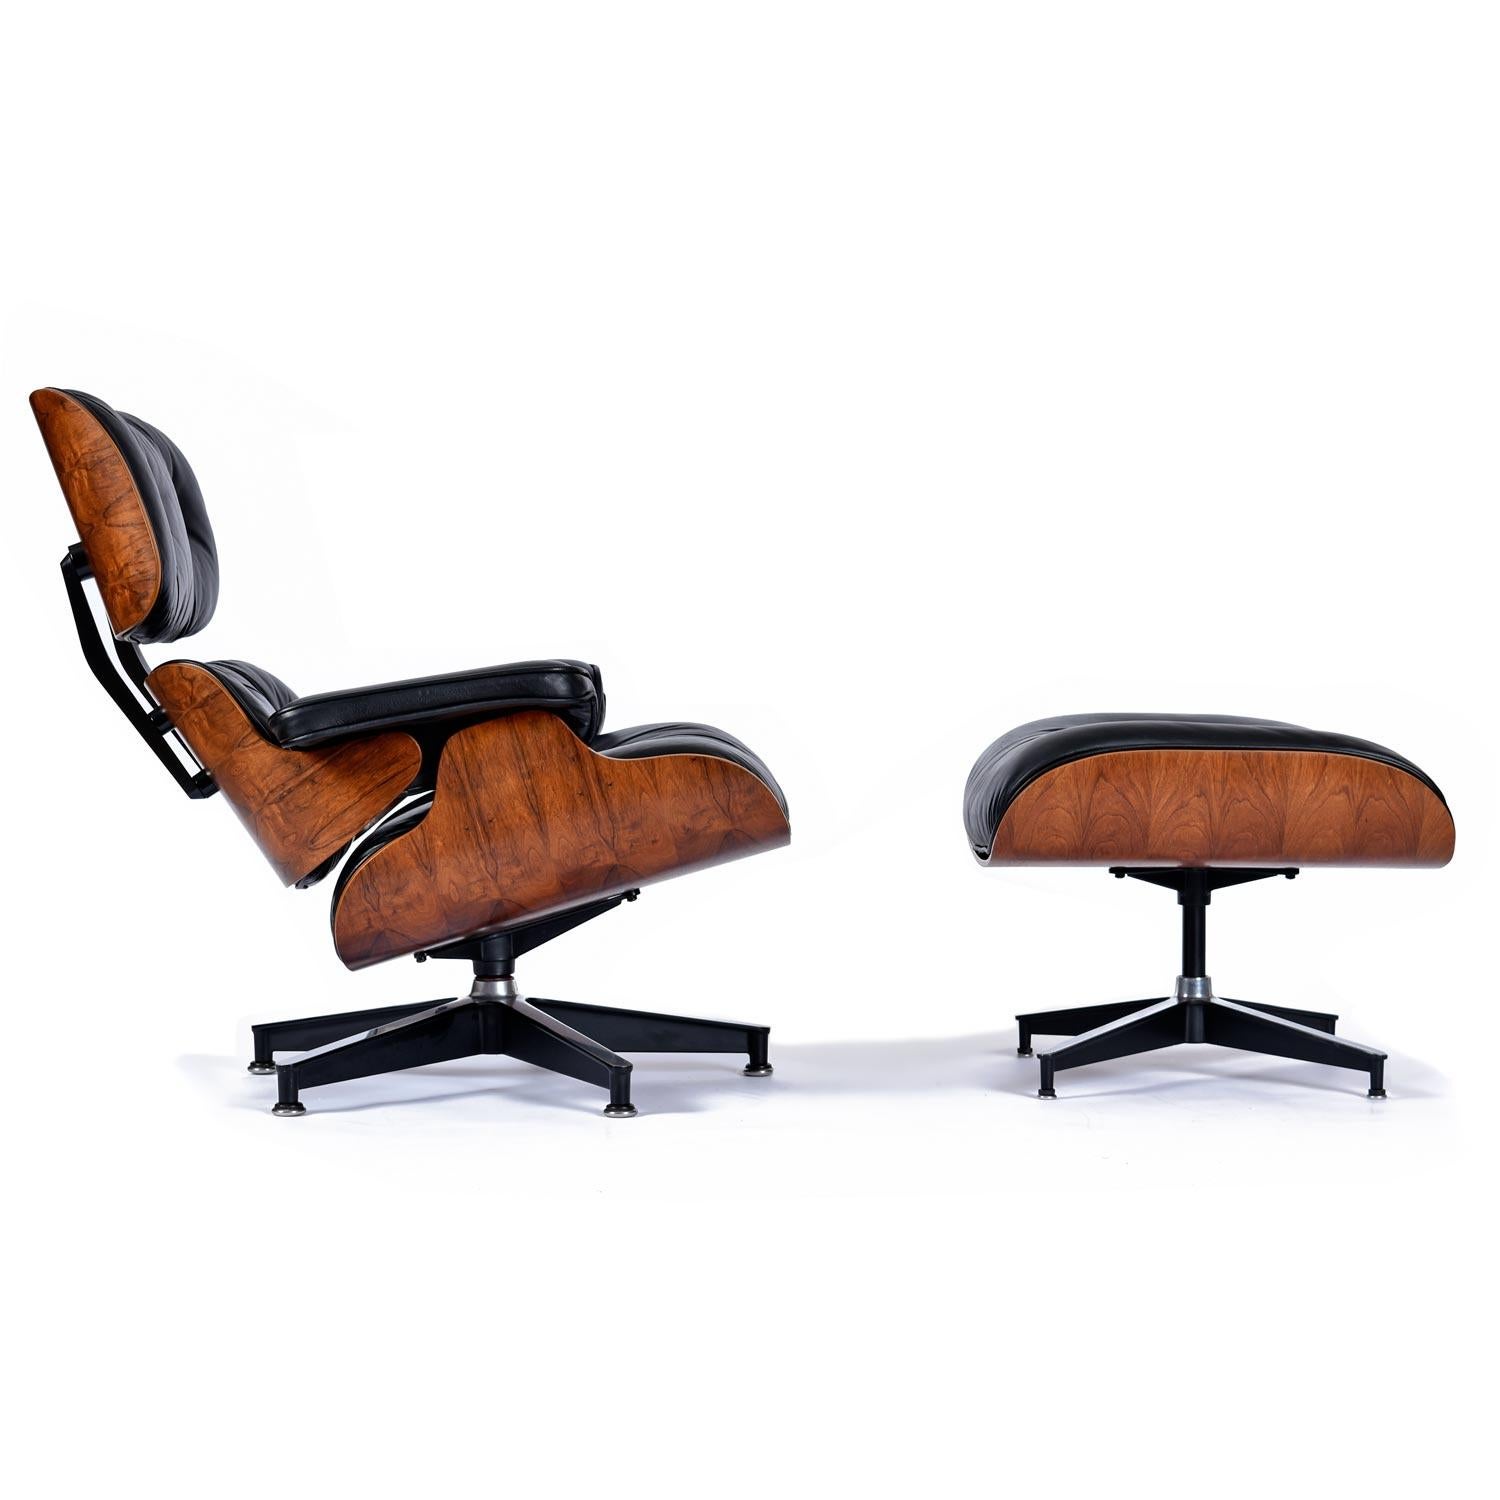 Mid-Century Modern 1977 Rosewood Eames Lounge Chair and Ottoman by Herman Miller in Black Leather